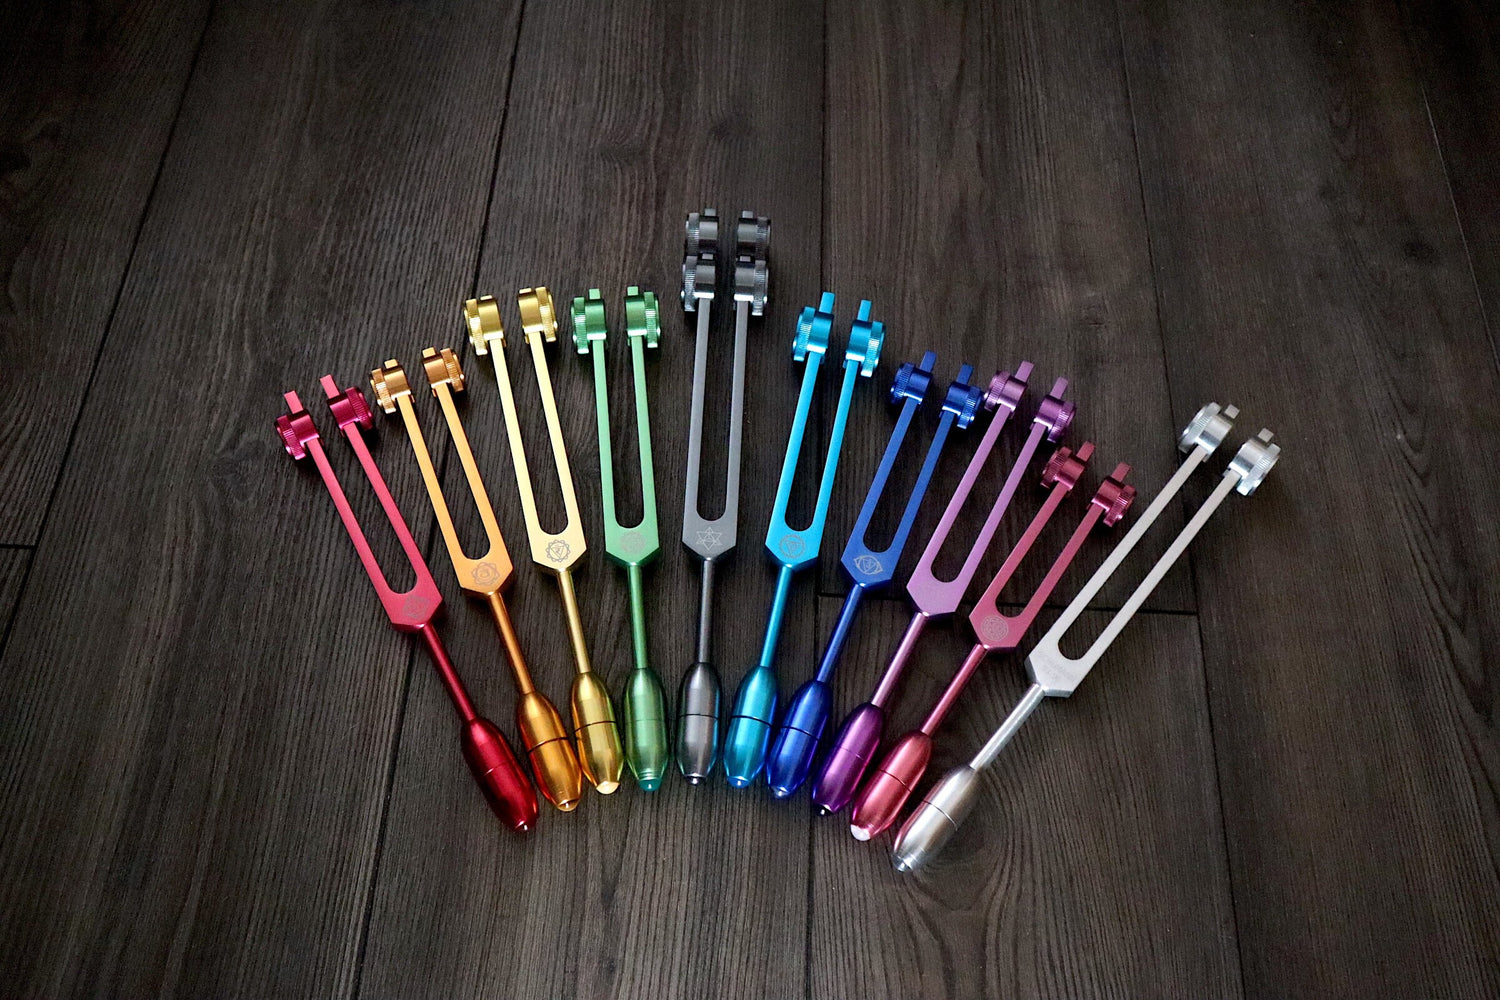 Myriad Melodies' Perfect Pitch (5 Cents) 432 Hz Chakra Color Set - 10 Chakra Tuning Forks - 10 Crystal Attenuators - Protective Cases